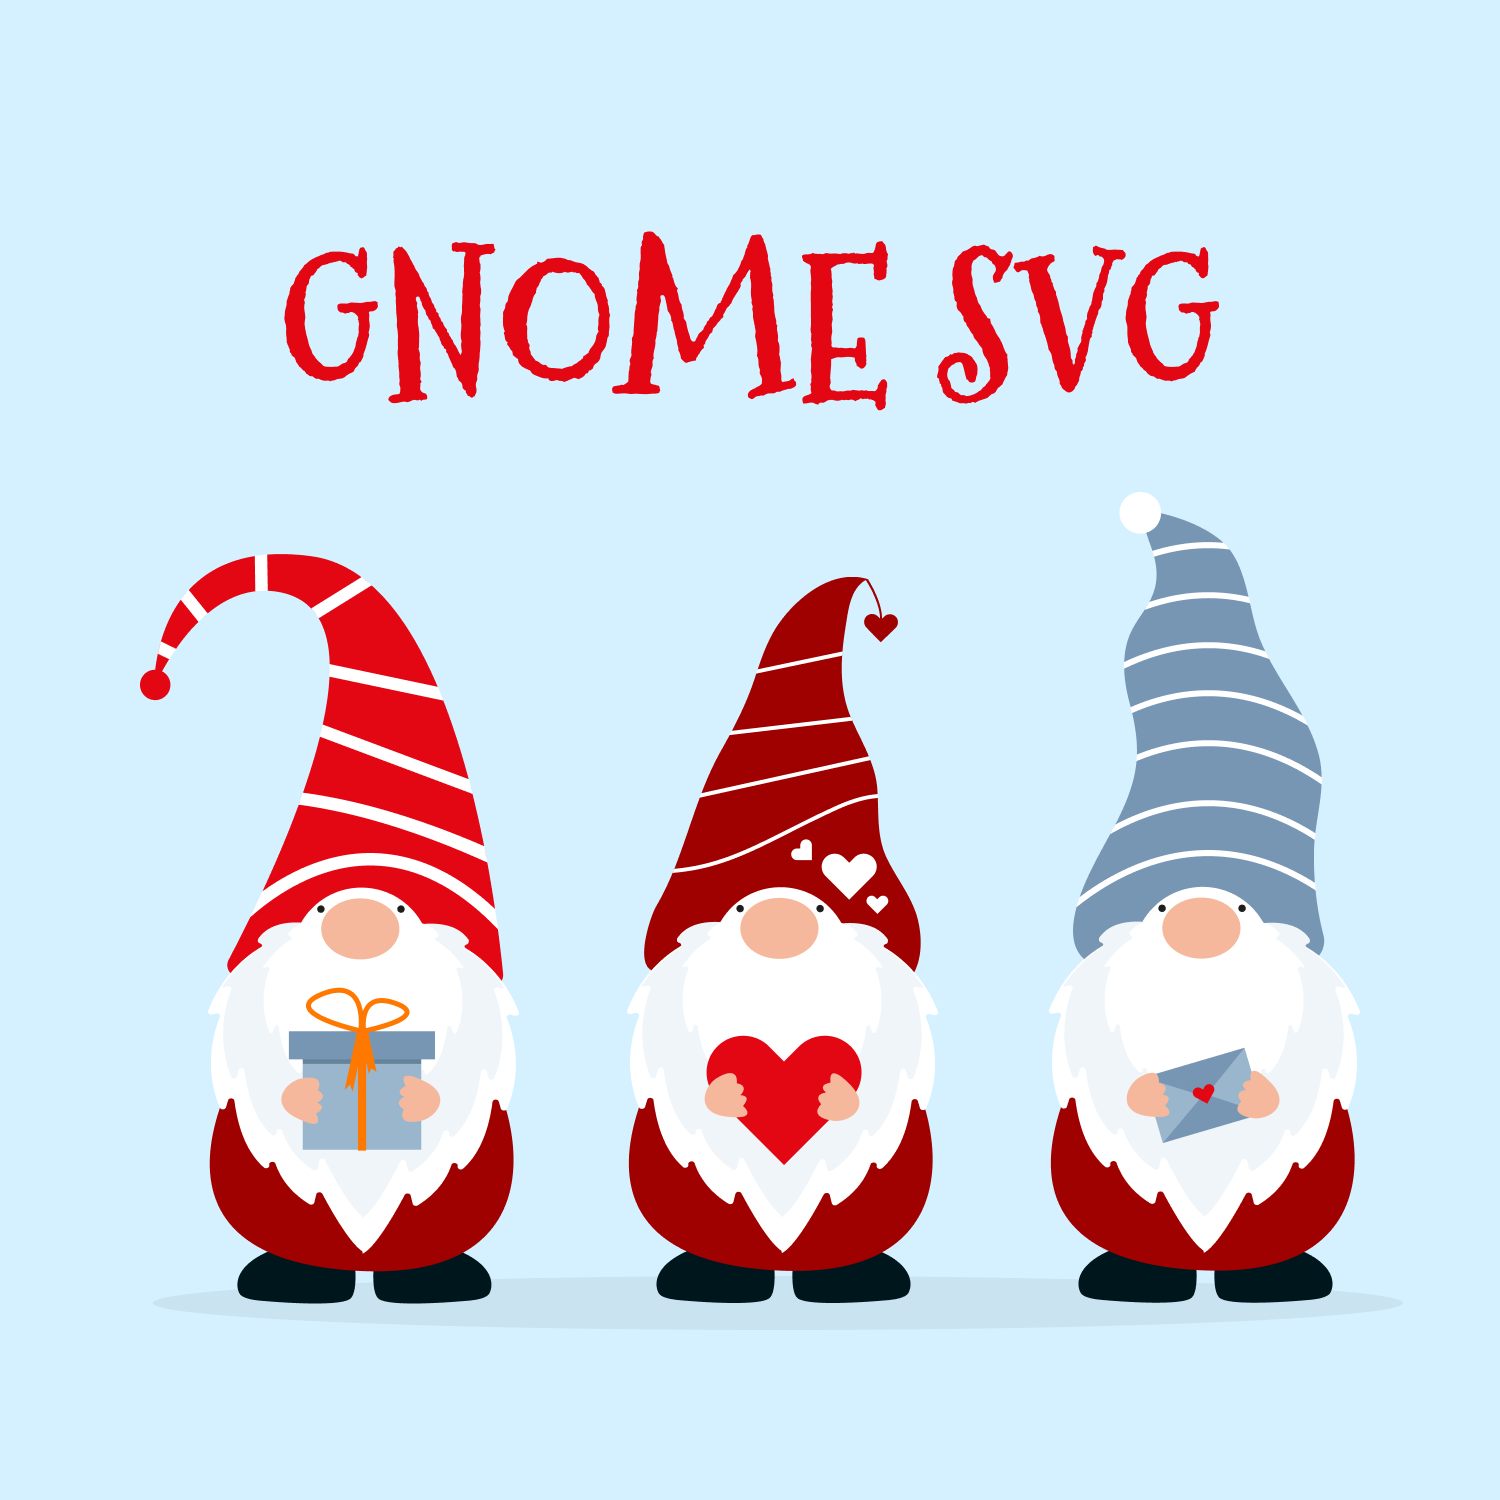 gnome svg files pack cover image.